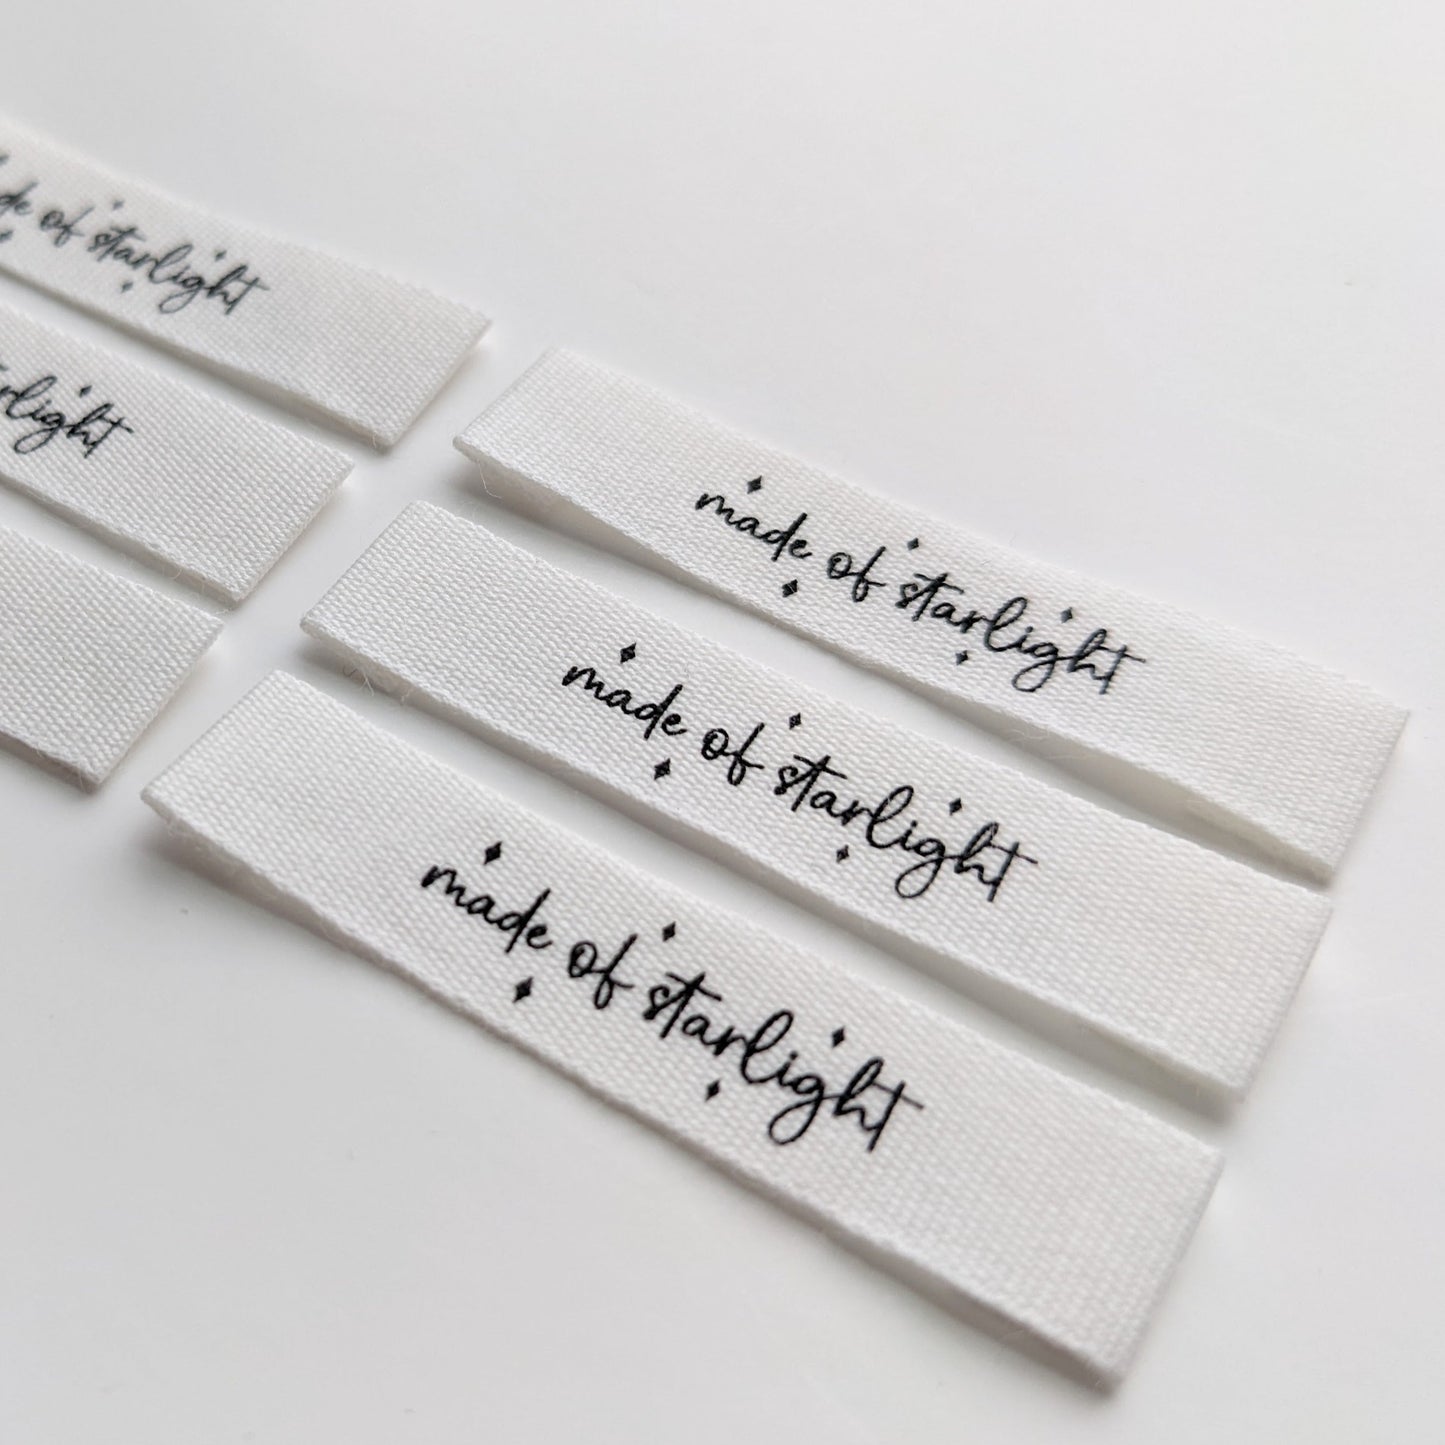 Made of Starlight | Cotton Luxe Labels